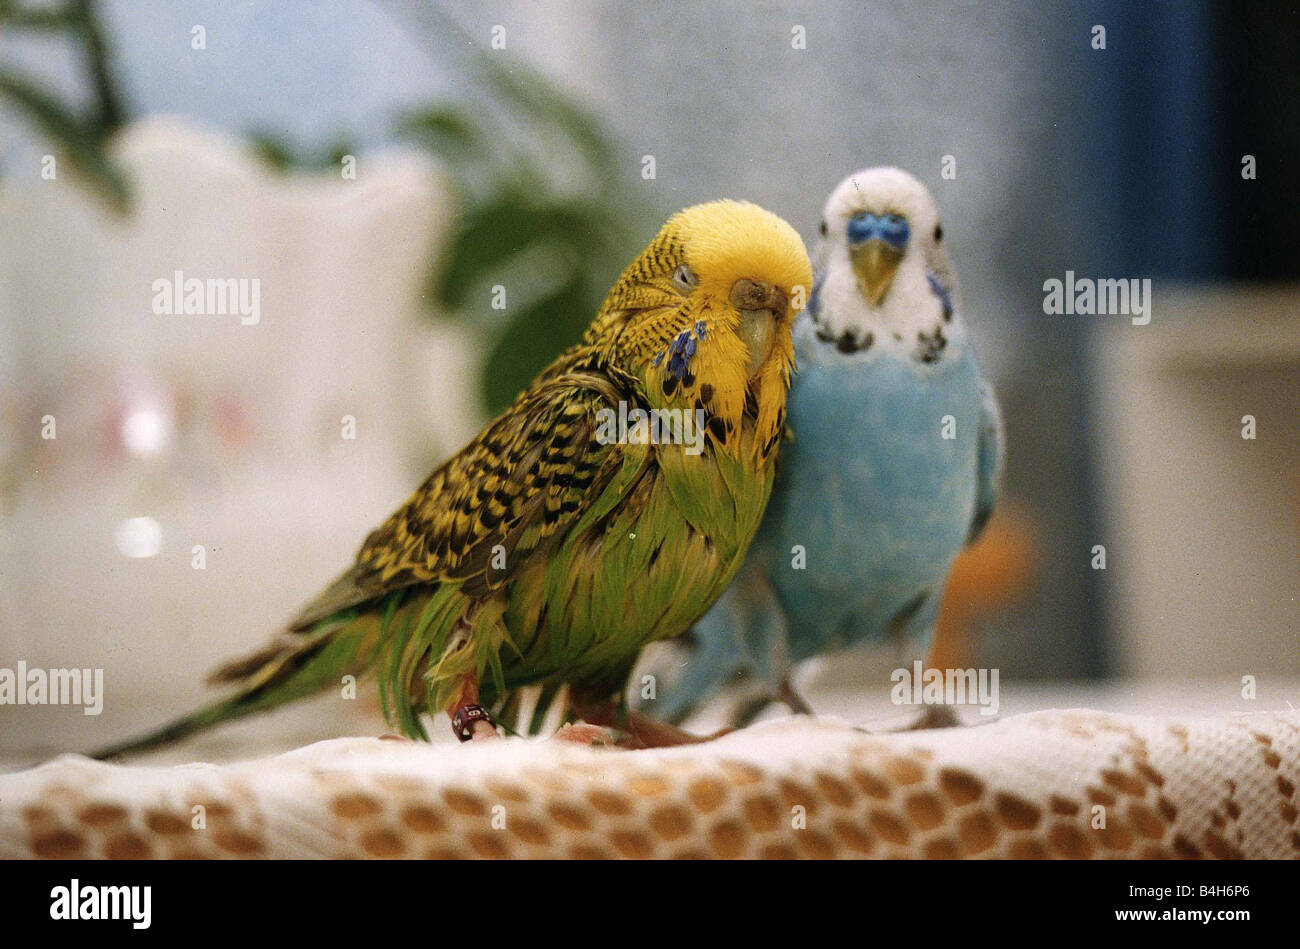 Birds Budgerigars Budgie call Jason Hathaway who flew into a deep fat frier and was rescued by his owner Stock Photo